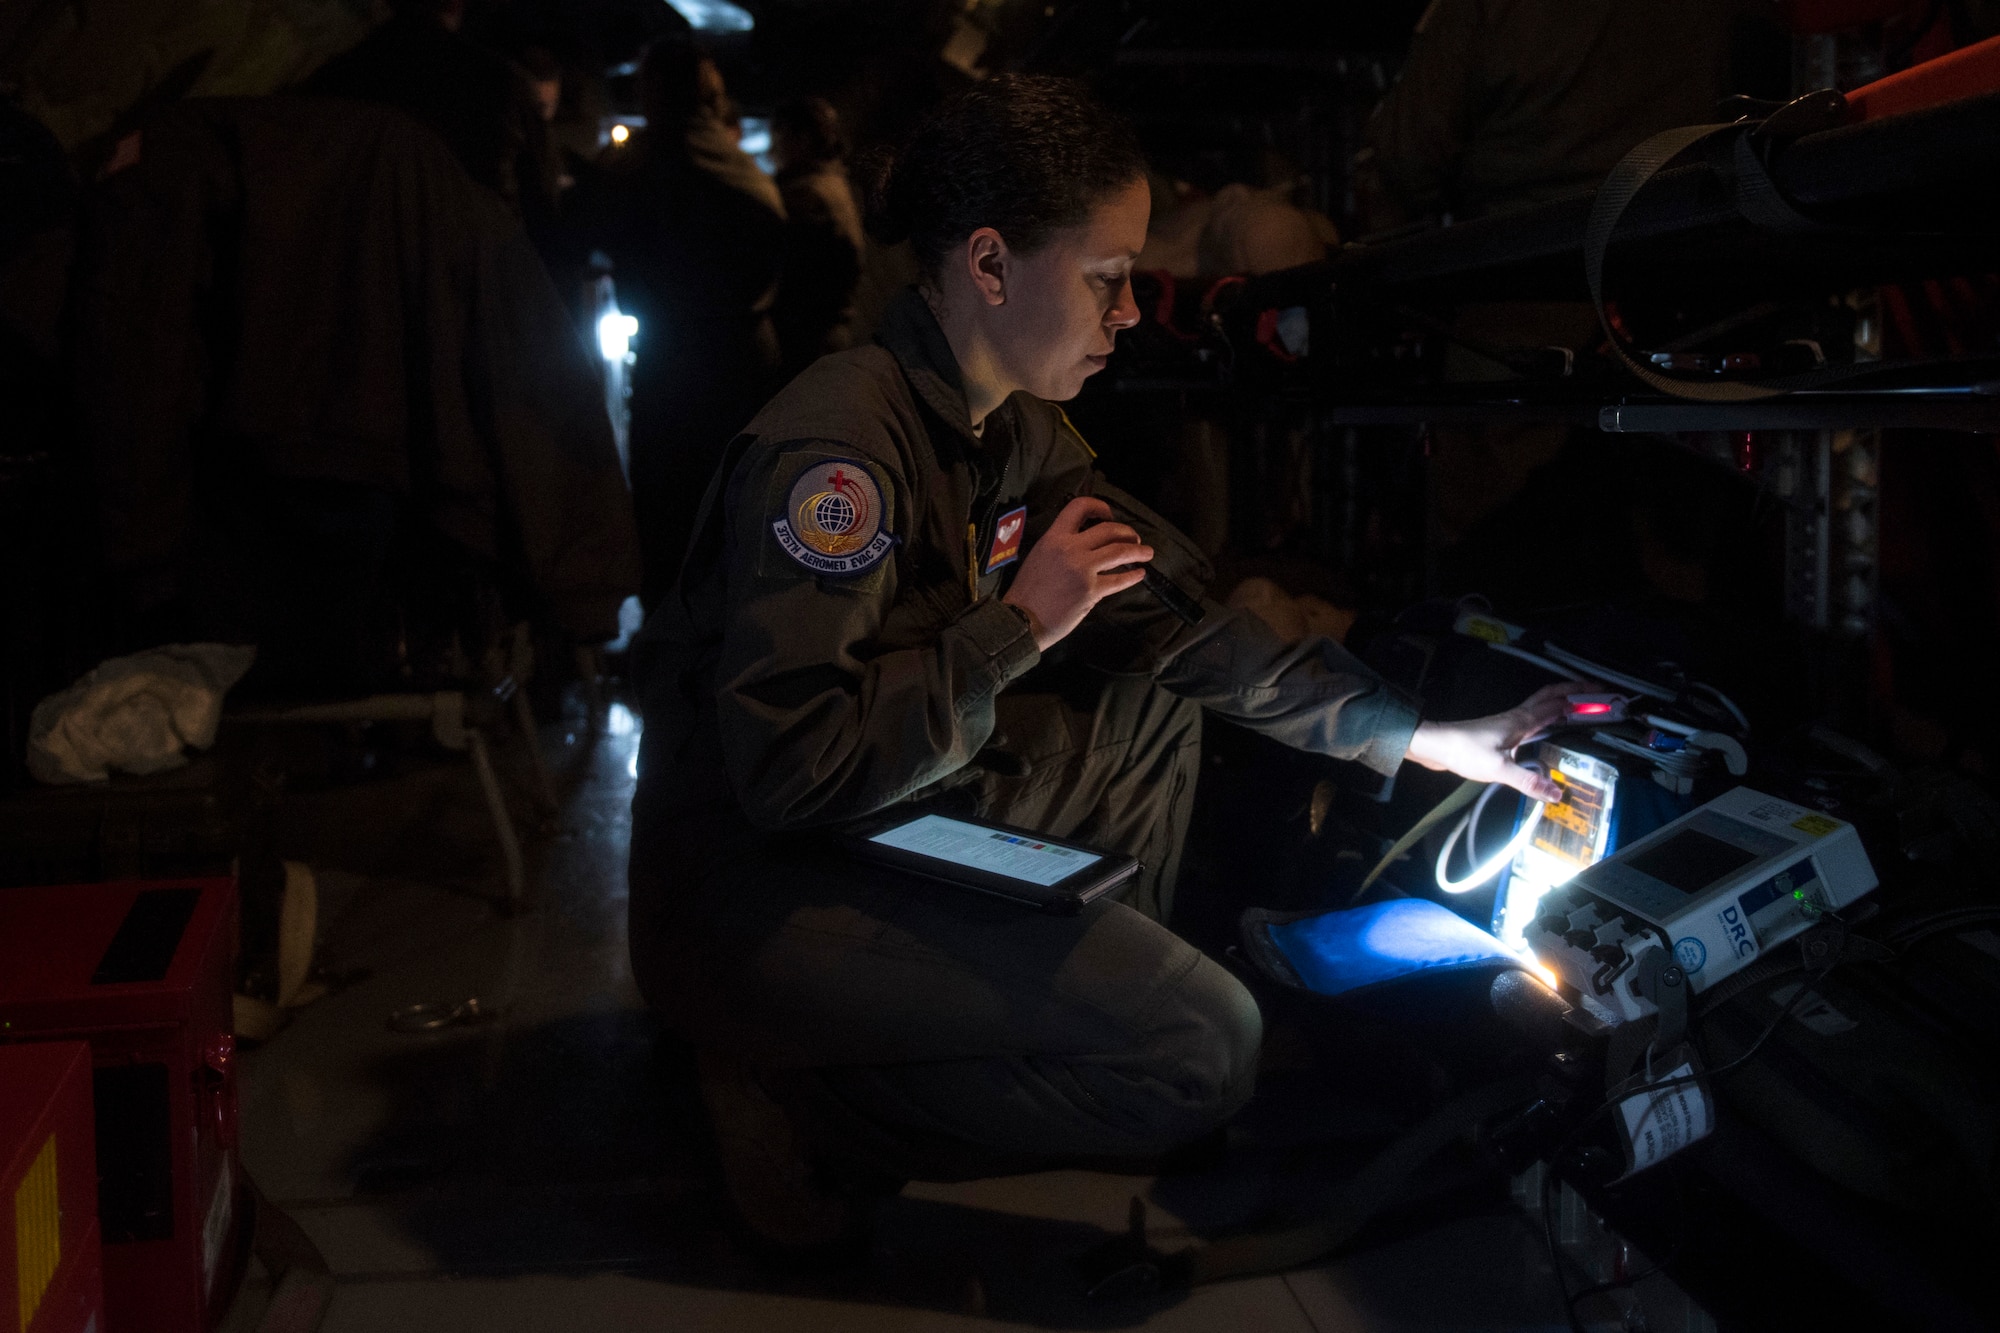 Staff Sgt. Kendra Fulton, 375th Aeromedical Evacuation Squadron technician, inspects the pulse oximeter as well as other medical equipment to confirm proper functionality during an aeromedical evacuation training at Fairchild Air Force Base, Washington, March 1, 2018. It is a top priority to ensure all medical gear can help AE Airmen provide care while patients are transported. (U.S. Air Force photo/Airman 1st Class Whitney Laine)